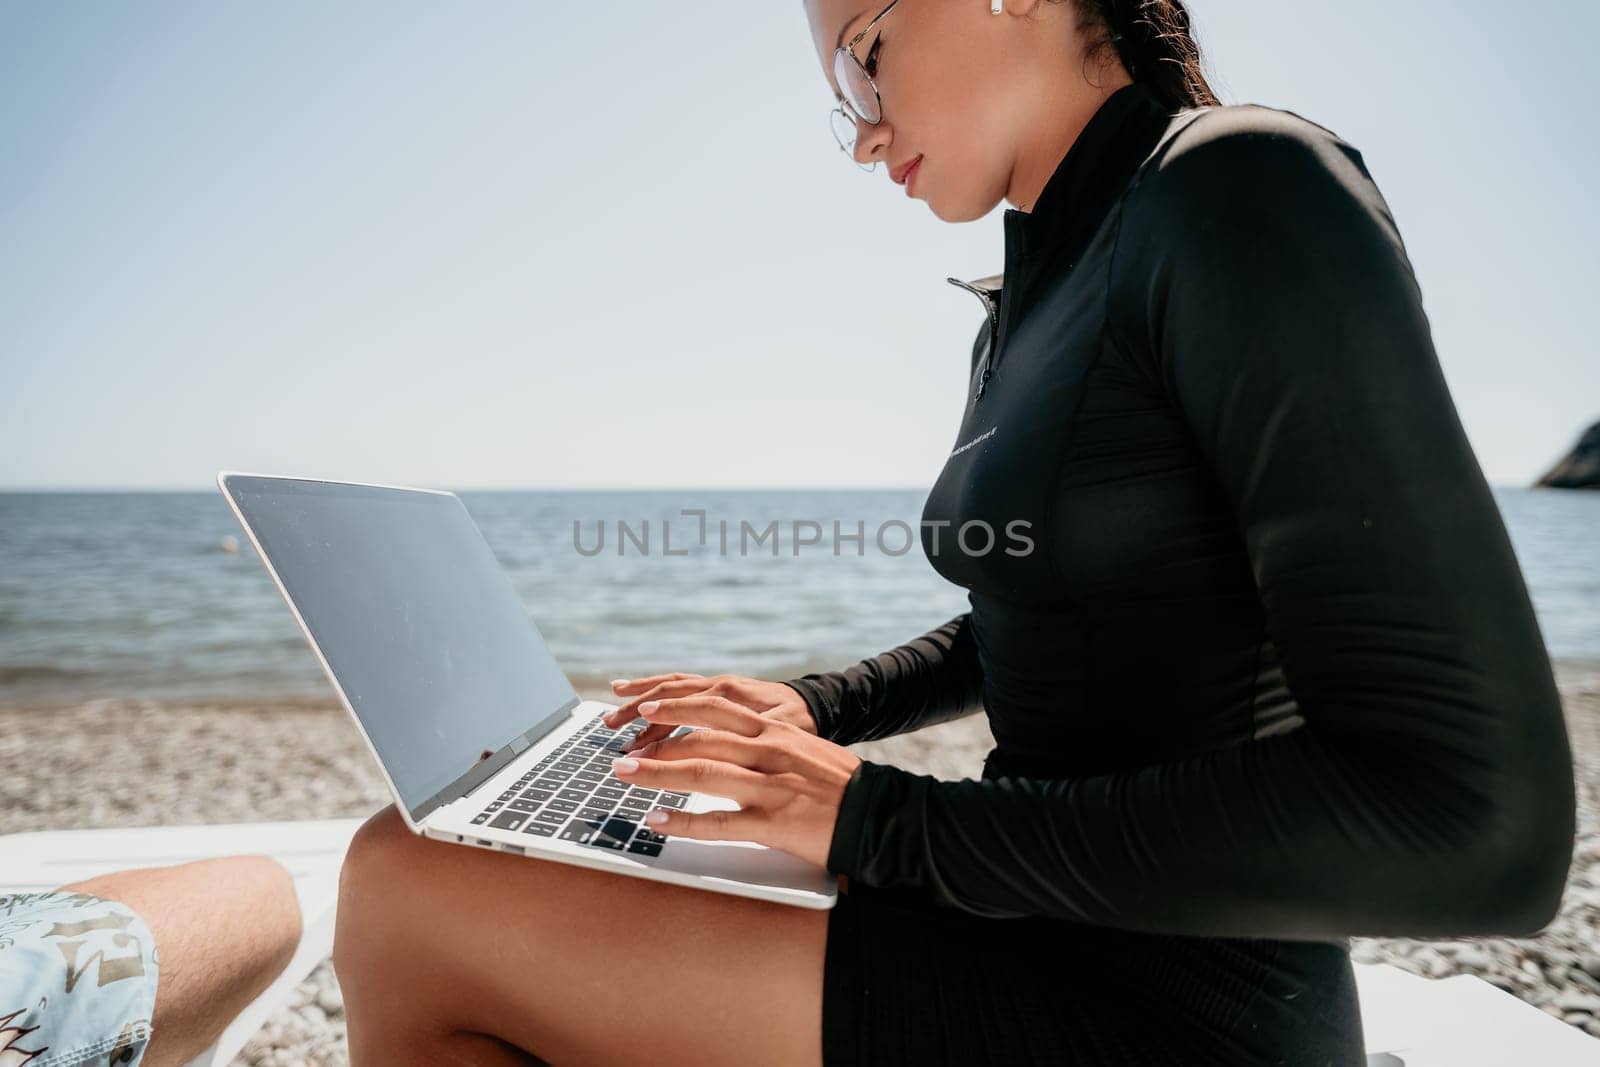 Digital nomad, Business man working on laptop by the sea. Man typing on computer by the sea at sunset, makes a business transaction online from a distance. Freelance, remote work on vacation